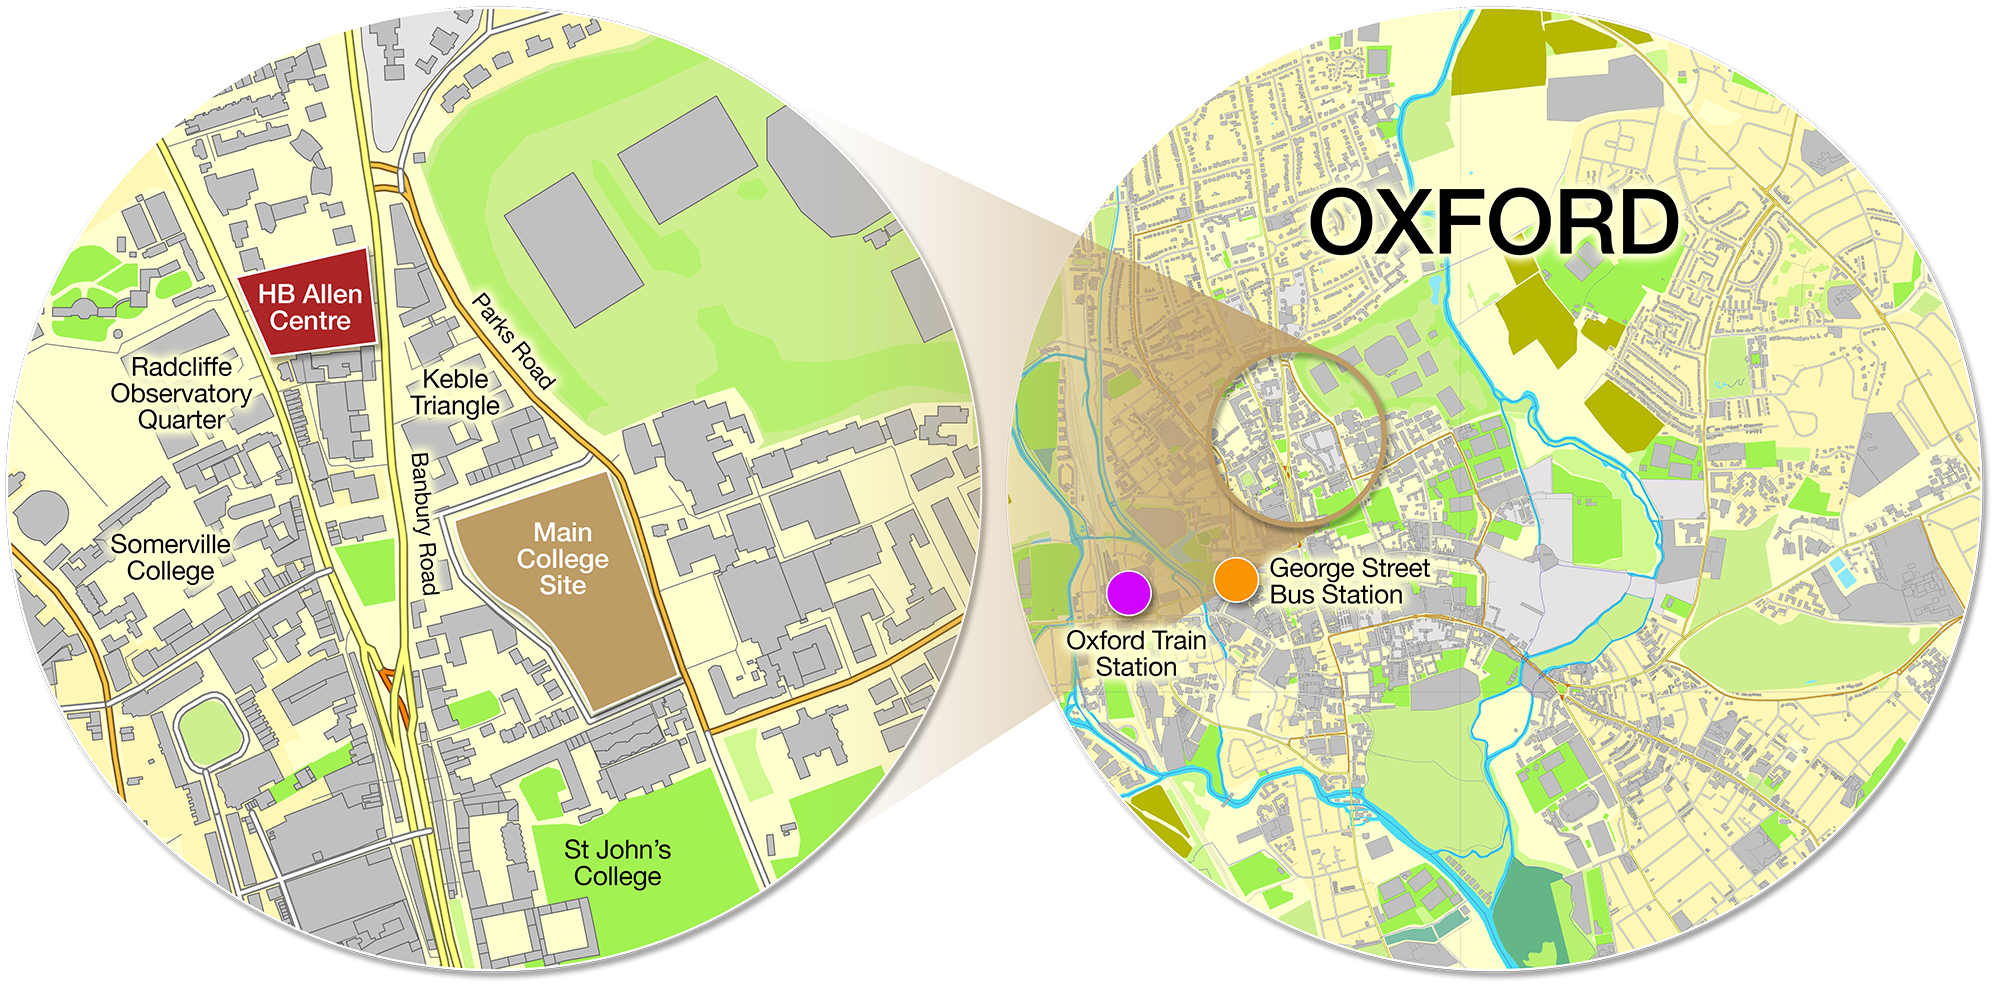 Keble College - Oxford Conferences Map